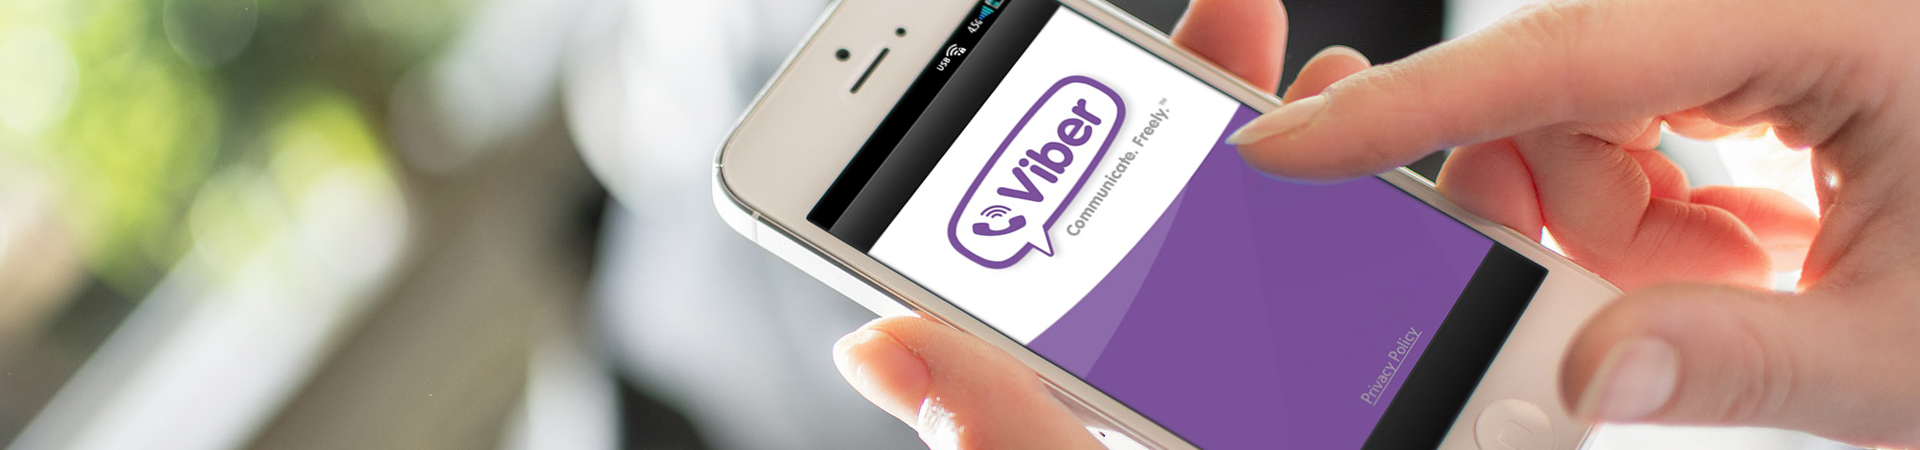 Design and Development of the Viber Messenger with 1.17 Billion Users